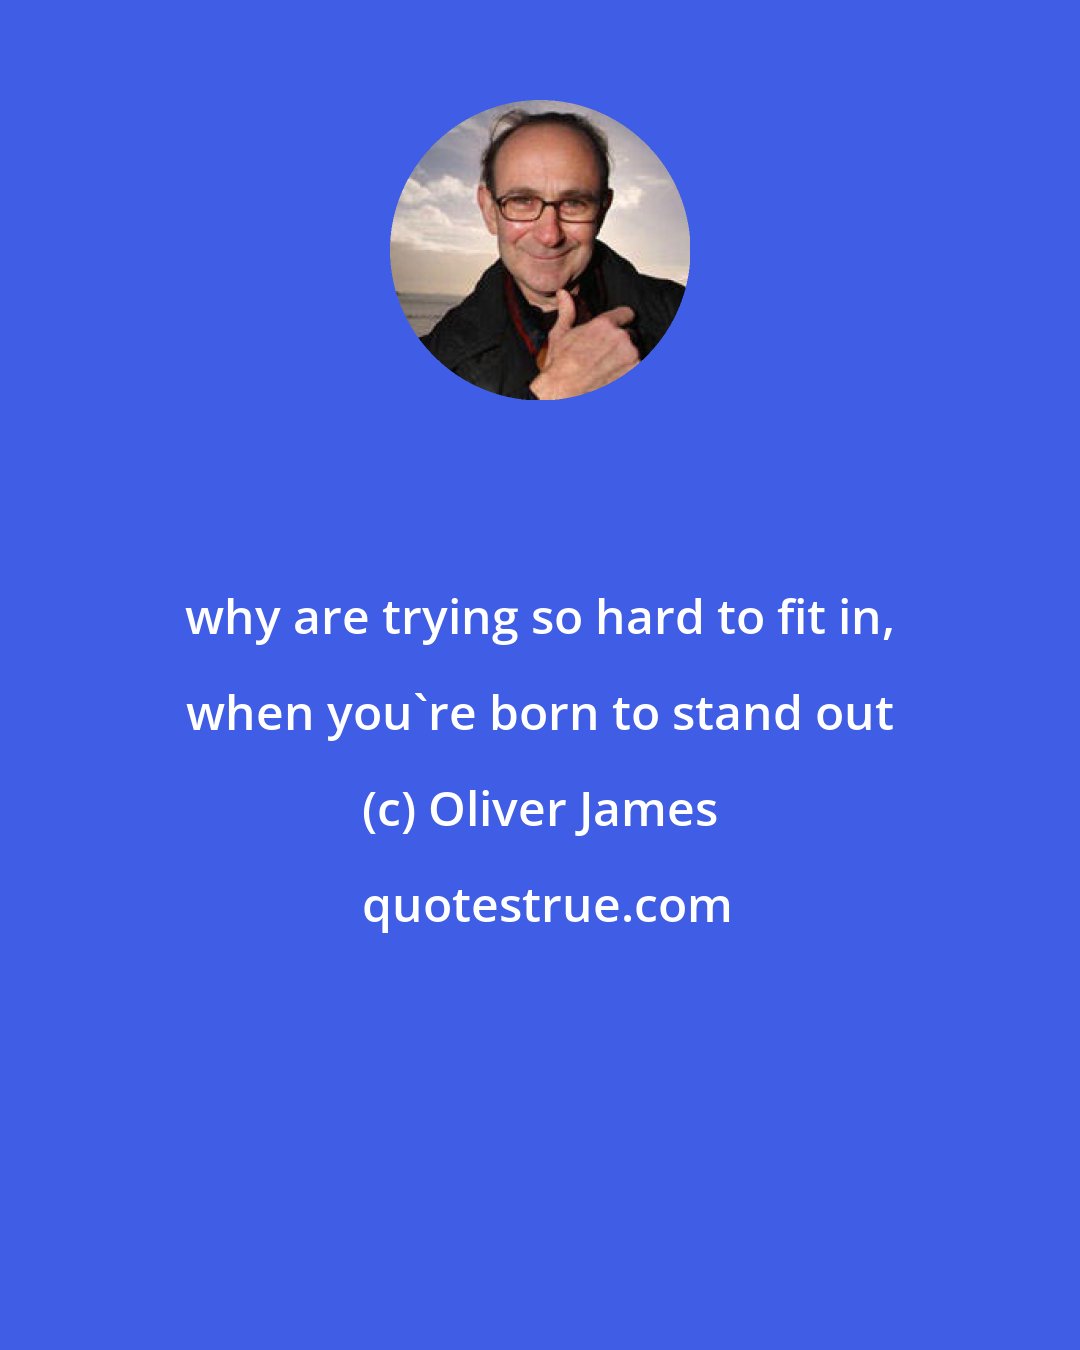 Oliver James: why are trying so hard to fit in, when you're born to stand out